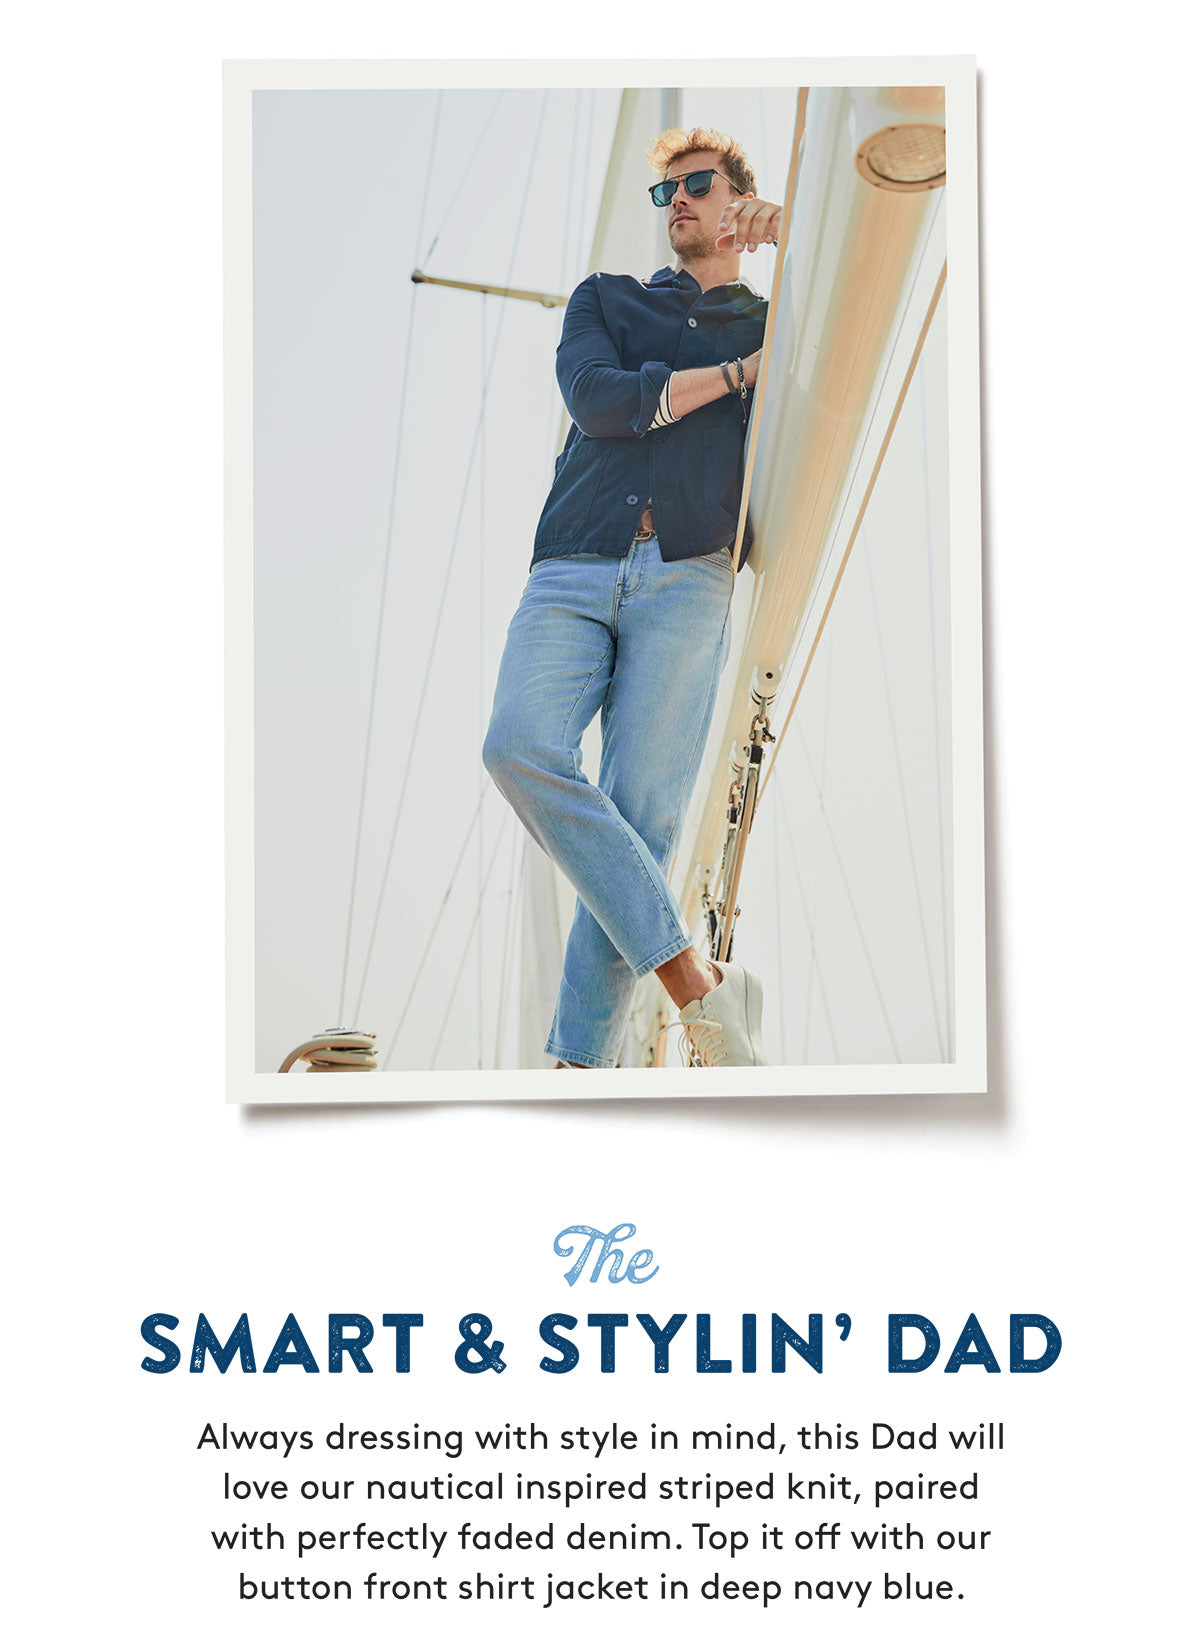 The SMART & STYLIN' DAD Always dressing with style in mind, this Dad will love our nautical inspired striped knit, paired with perfectly faded denim. Top it off with our button front shirt jacket in deep navy blue.